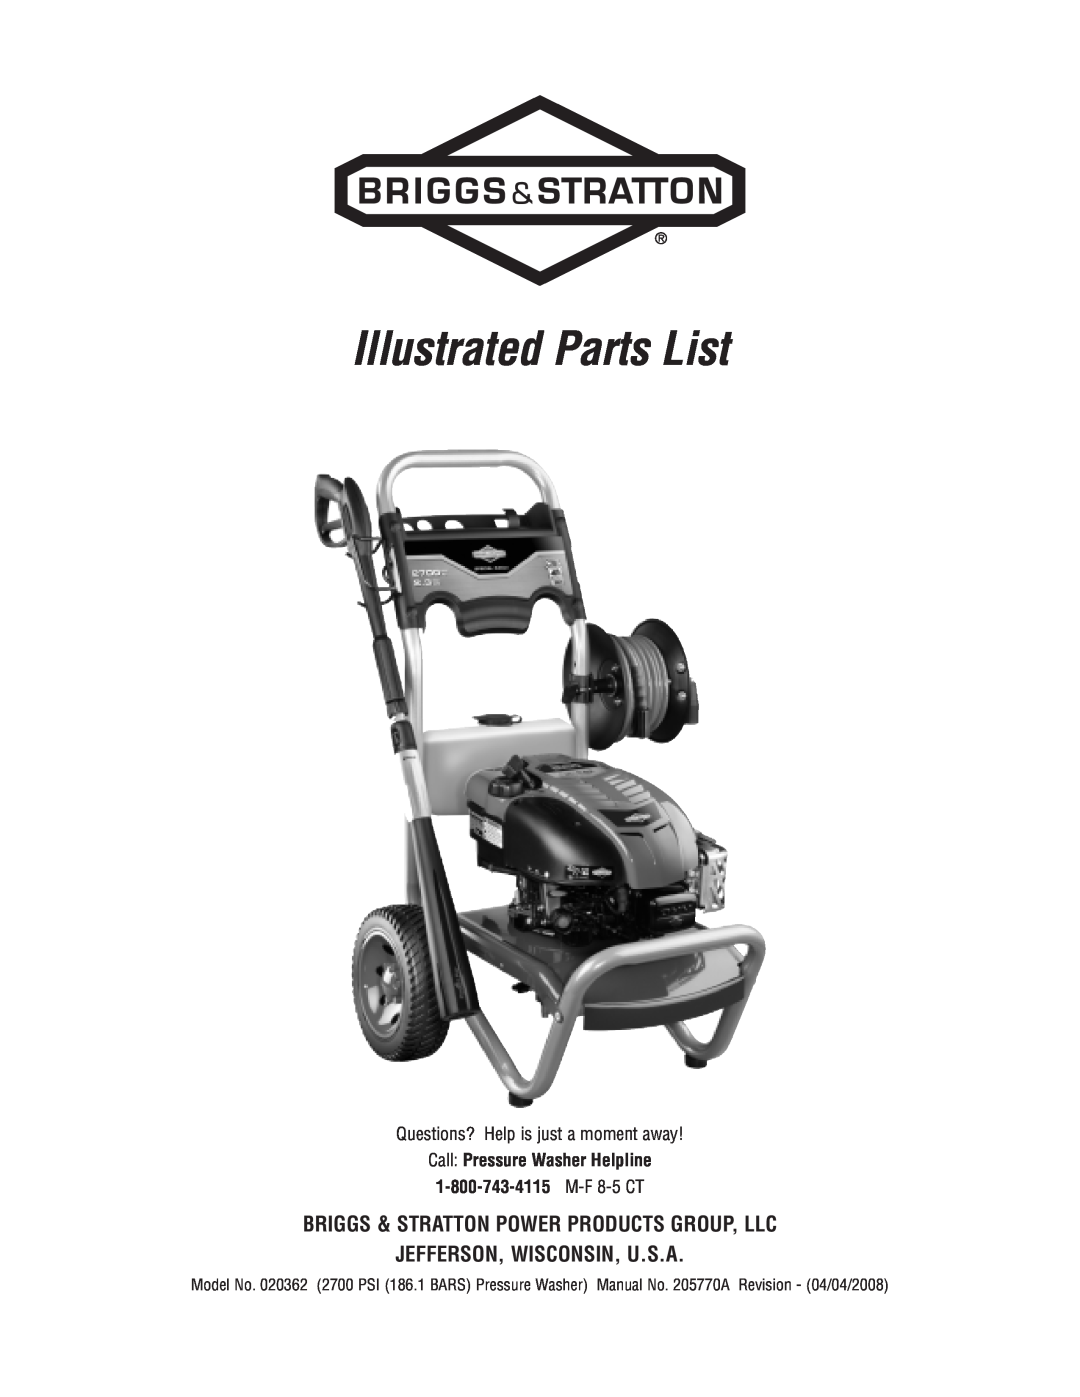 Briggs & Stratton 20362 manual Illustrated Parts List, Briggs & Stratton Power Products Group, Llc 